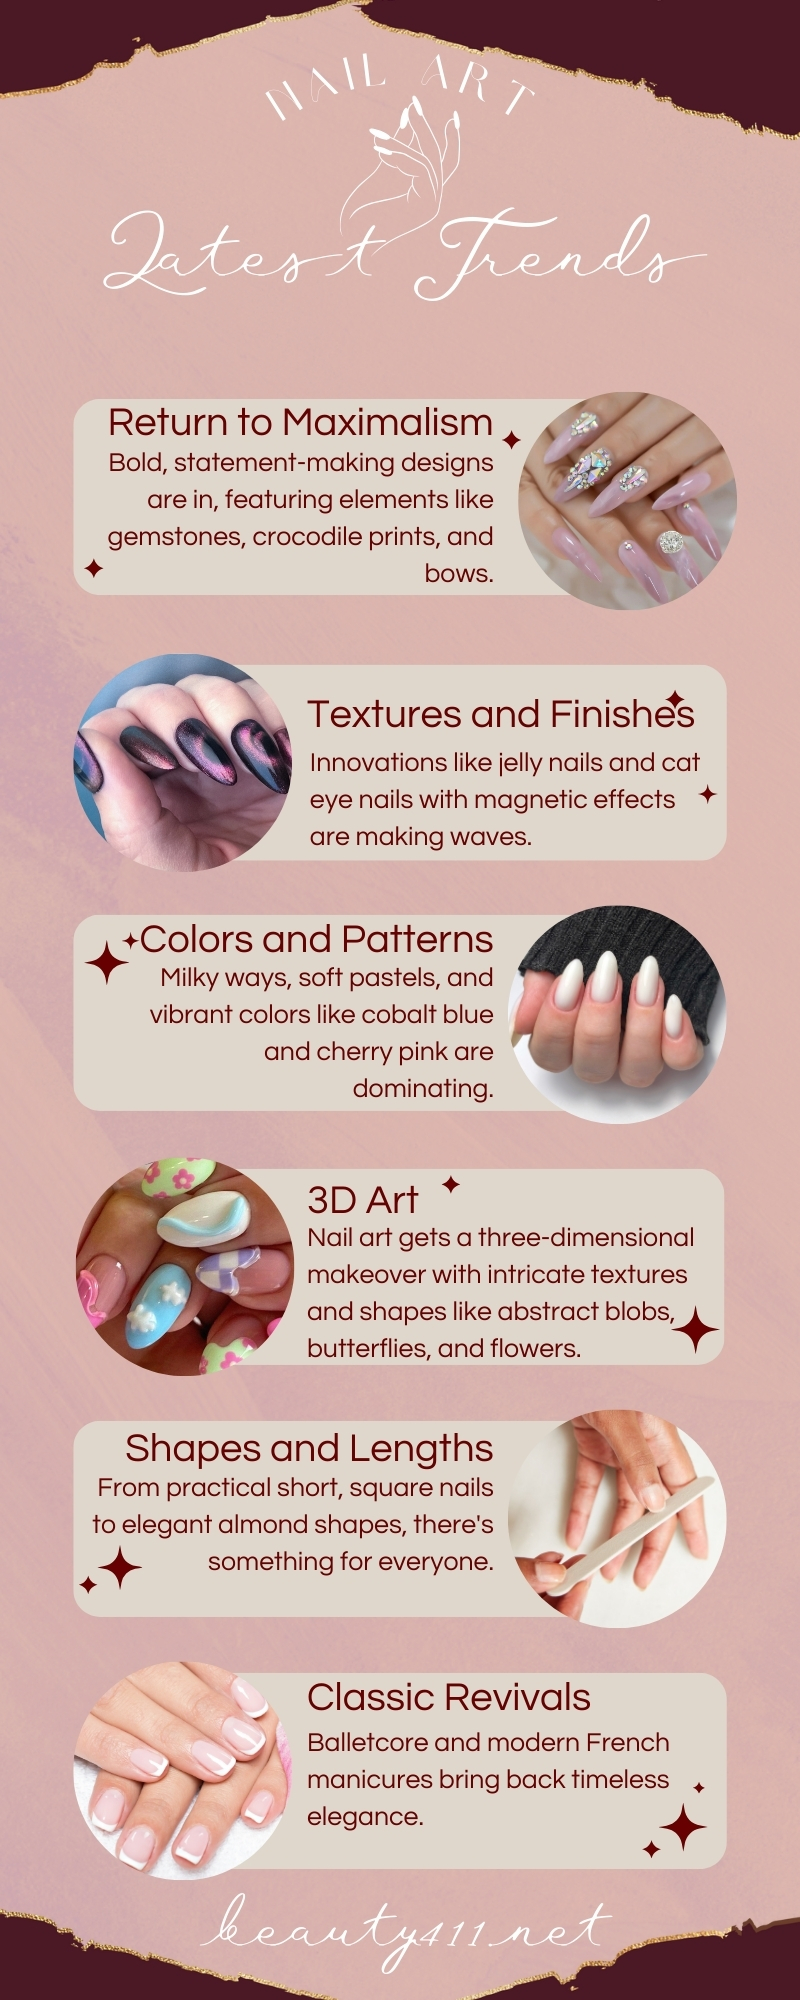 Nail Art Latest Trends Infographic